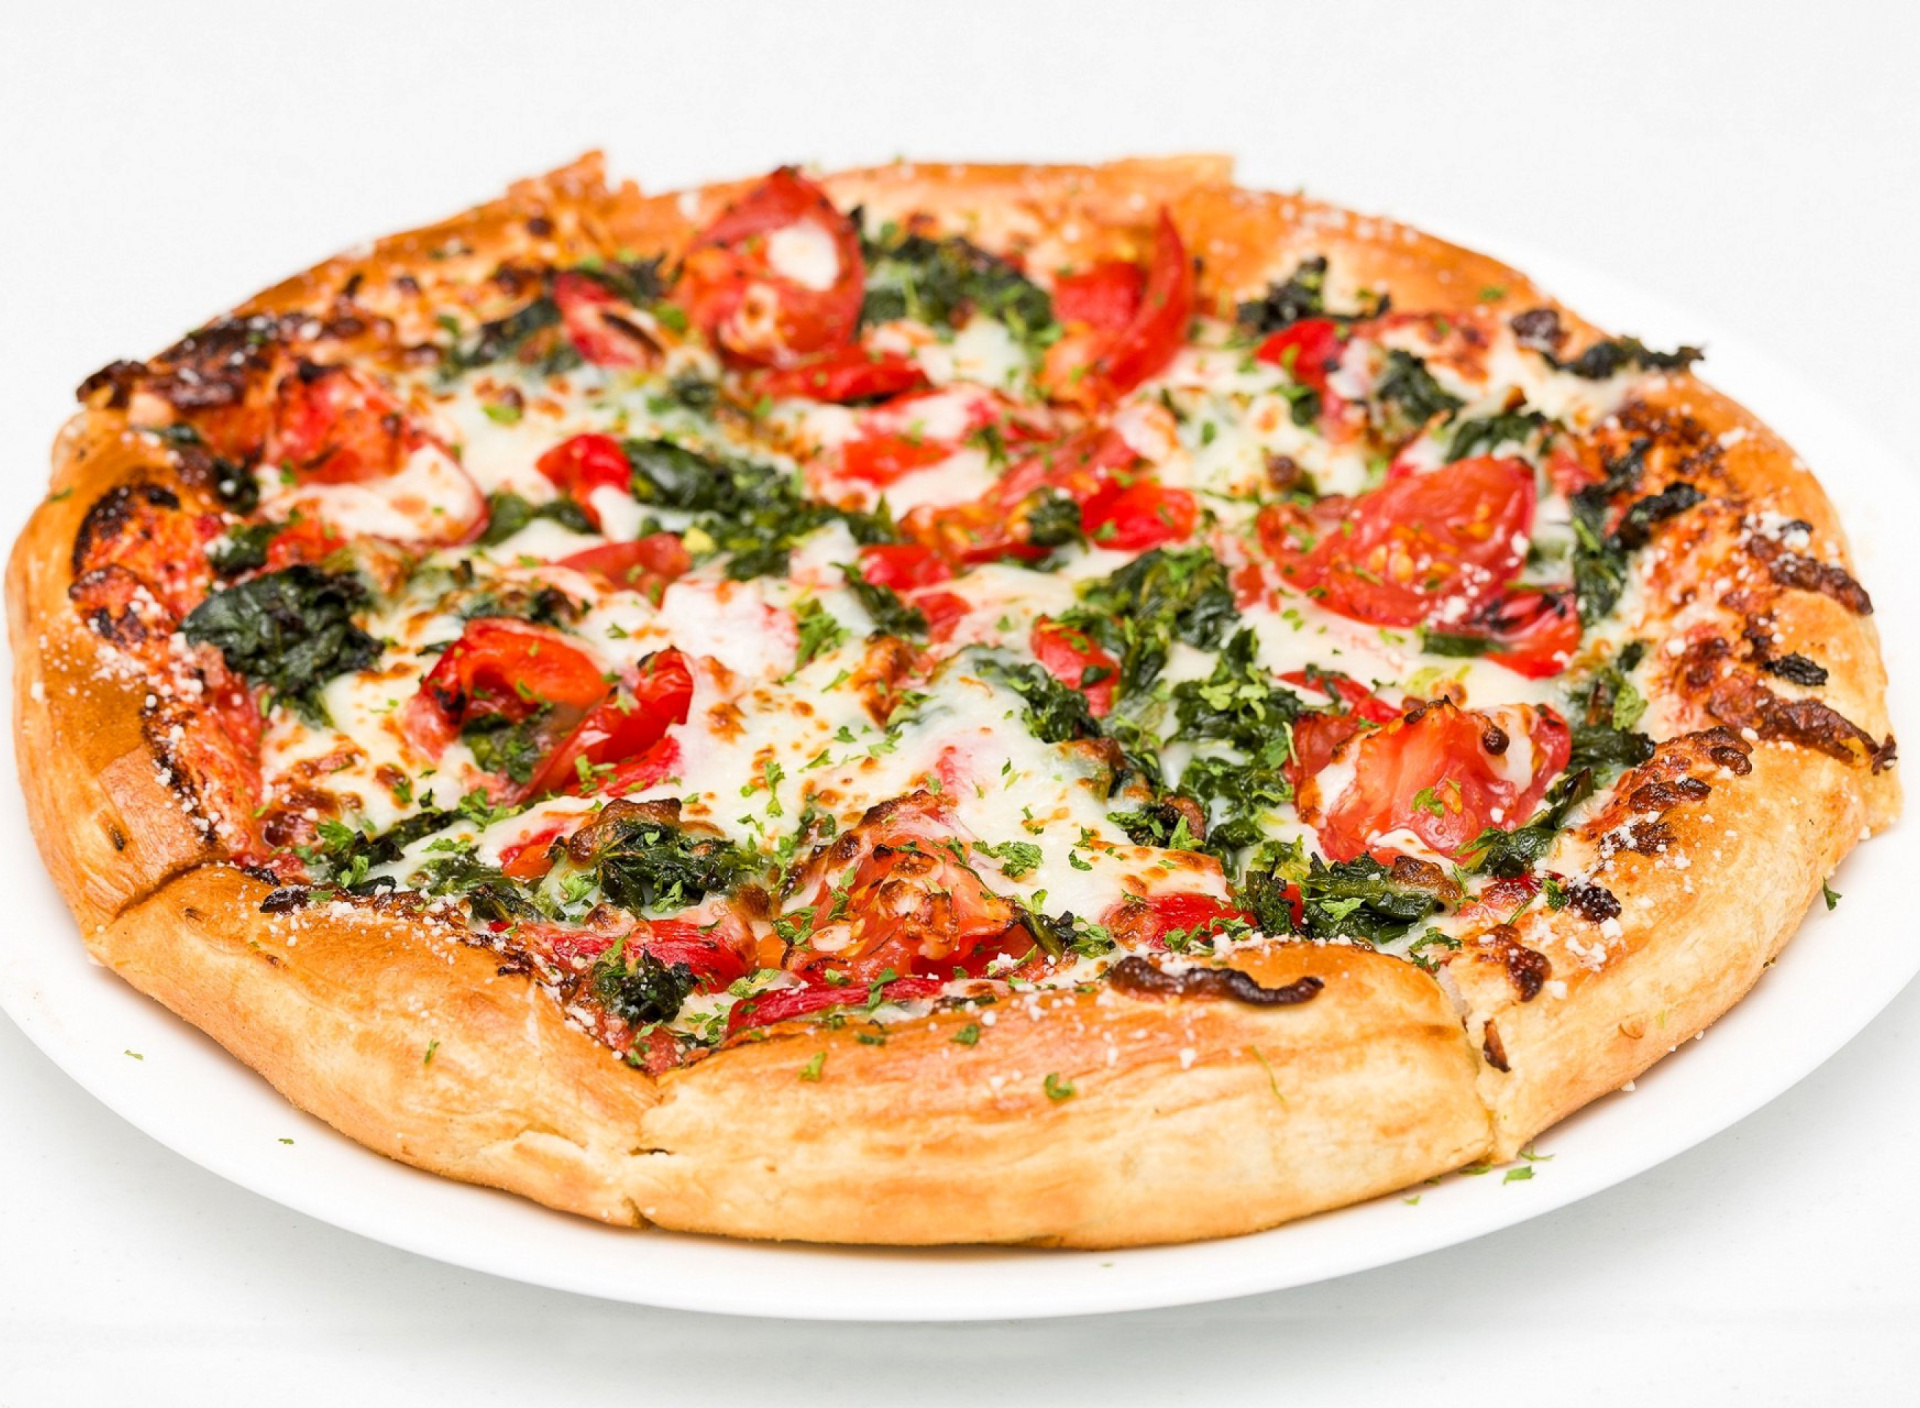 Pizza with spinach screenshot #1 1920x1408